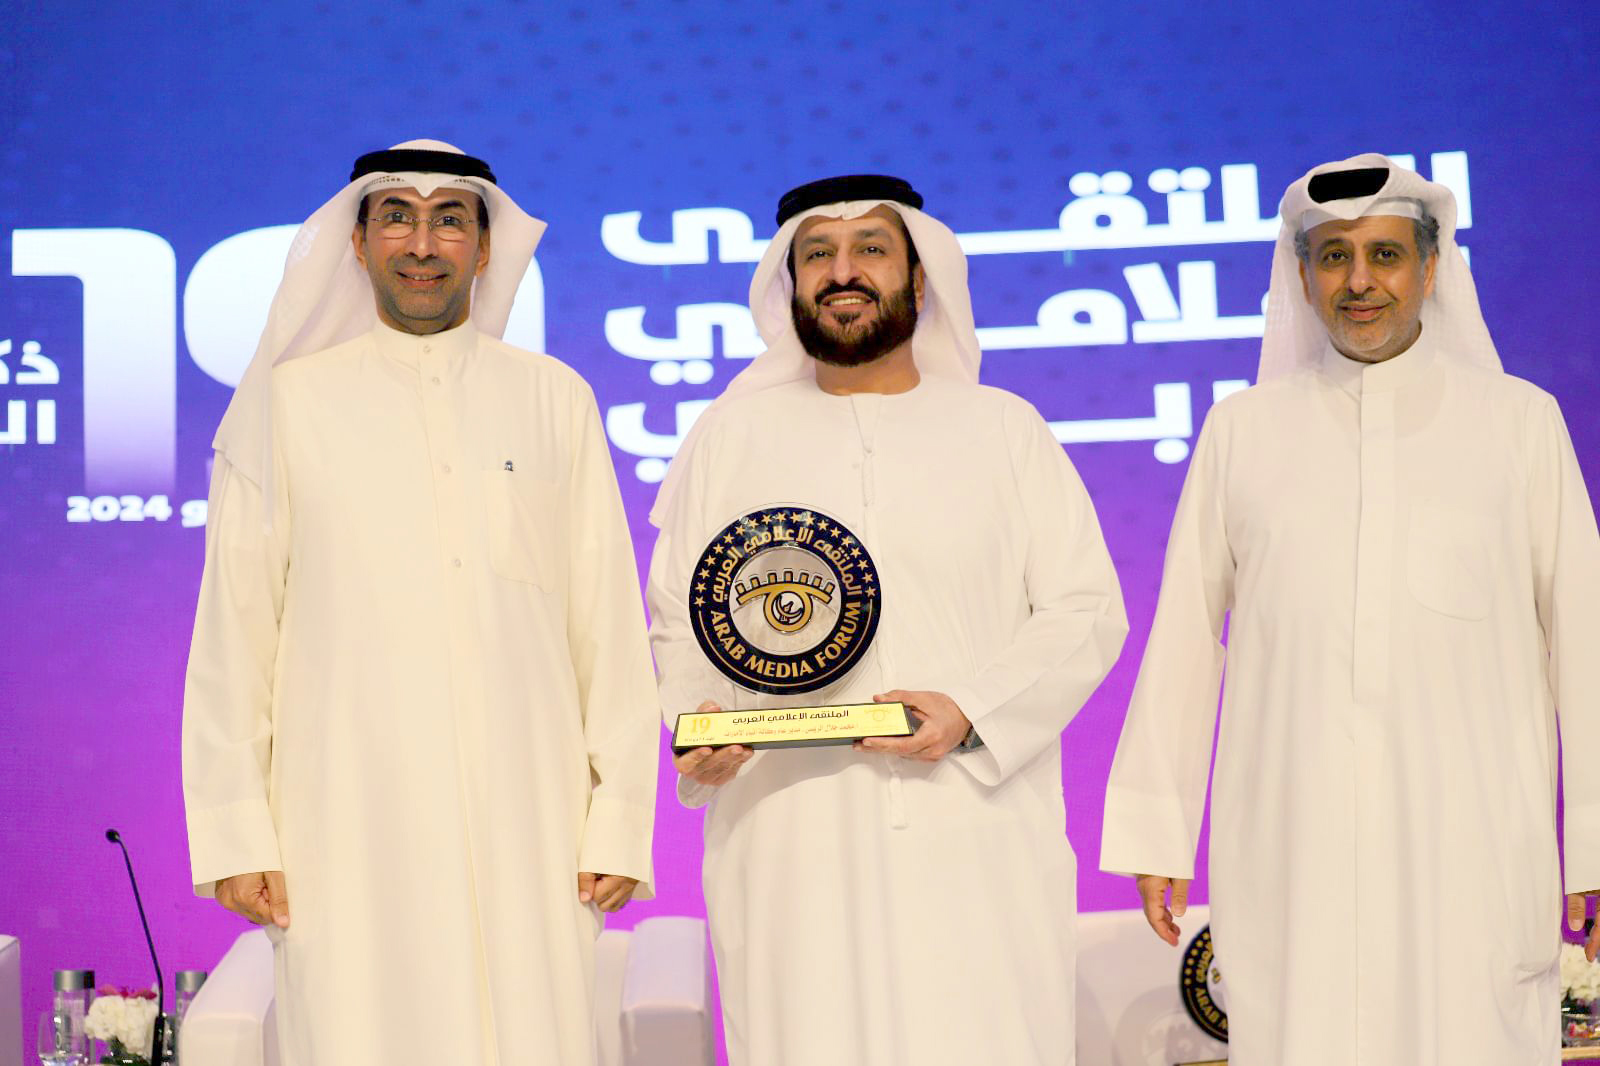 arab media forum honours emirates news agency's director general with 'excellence award'